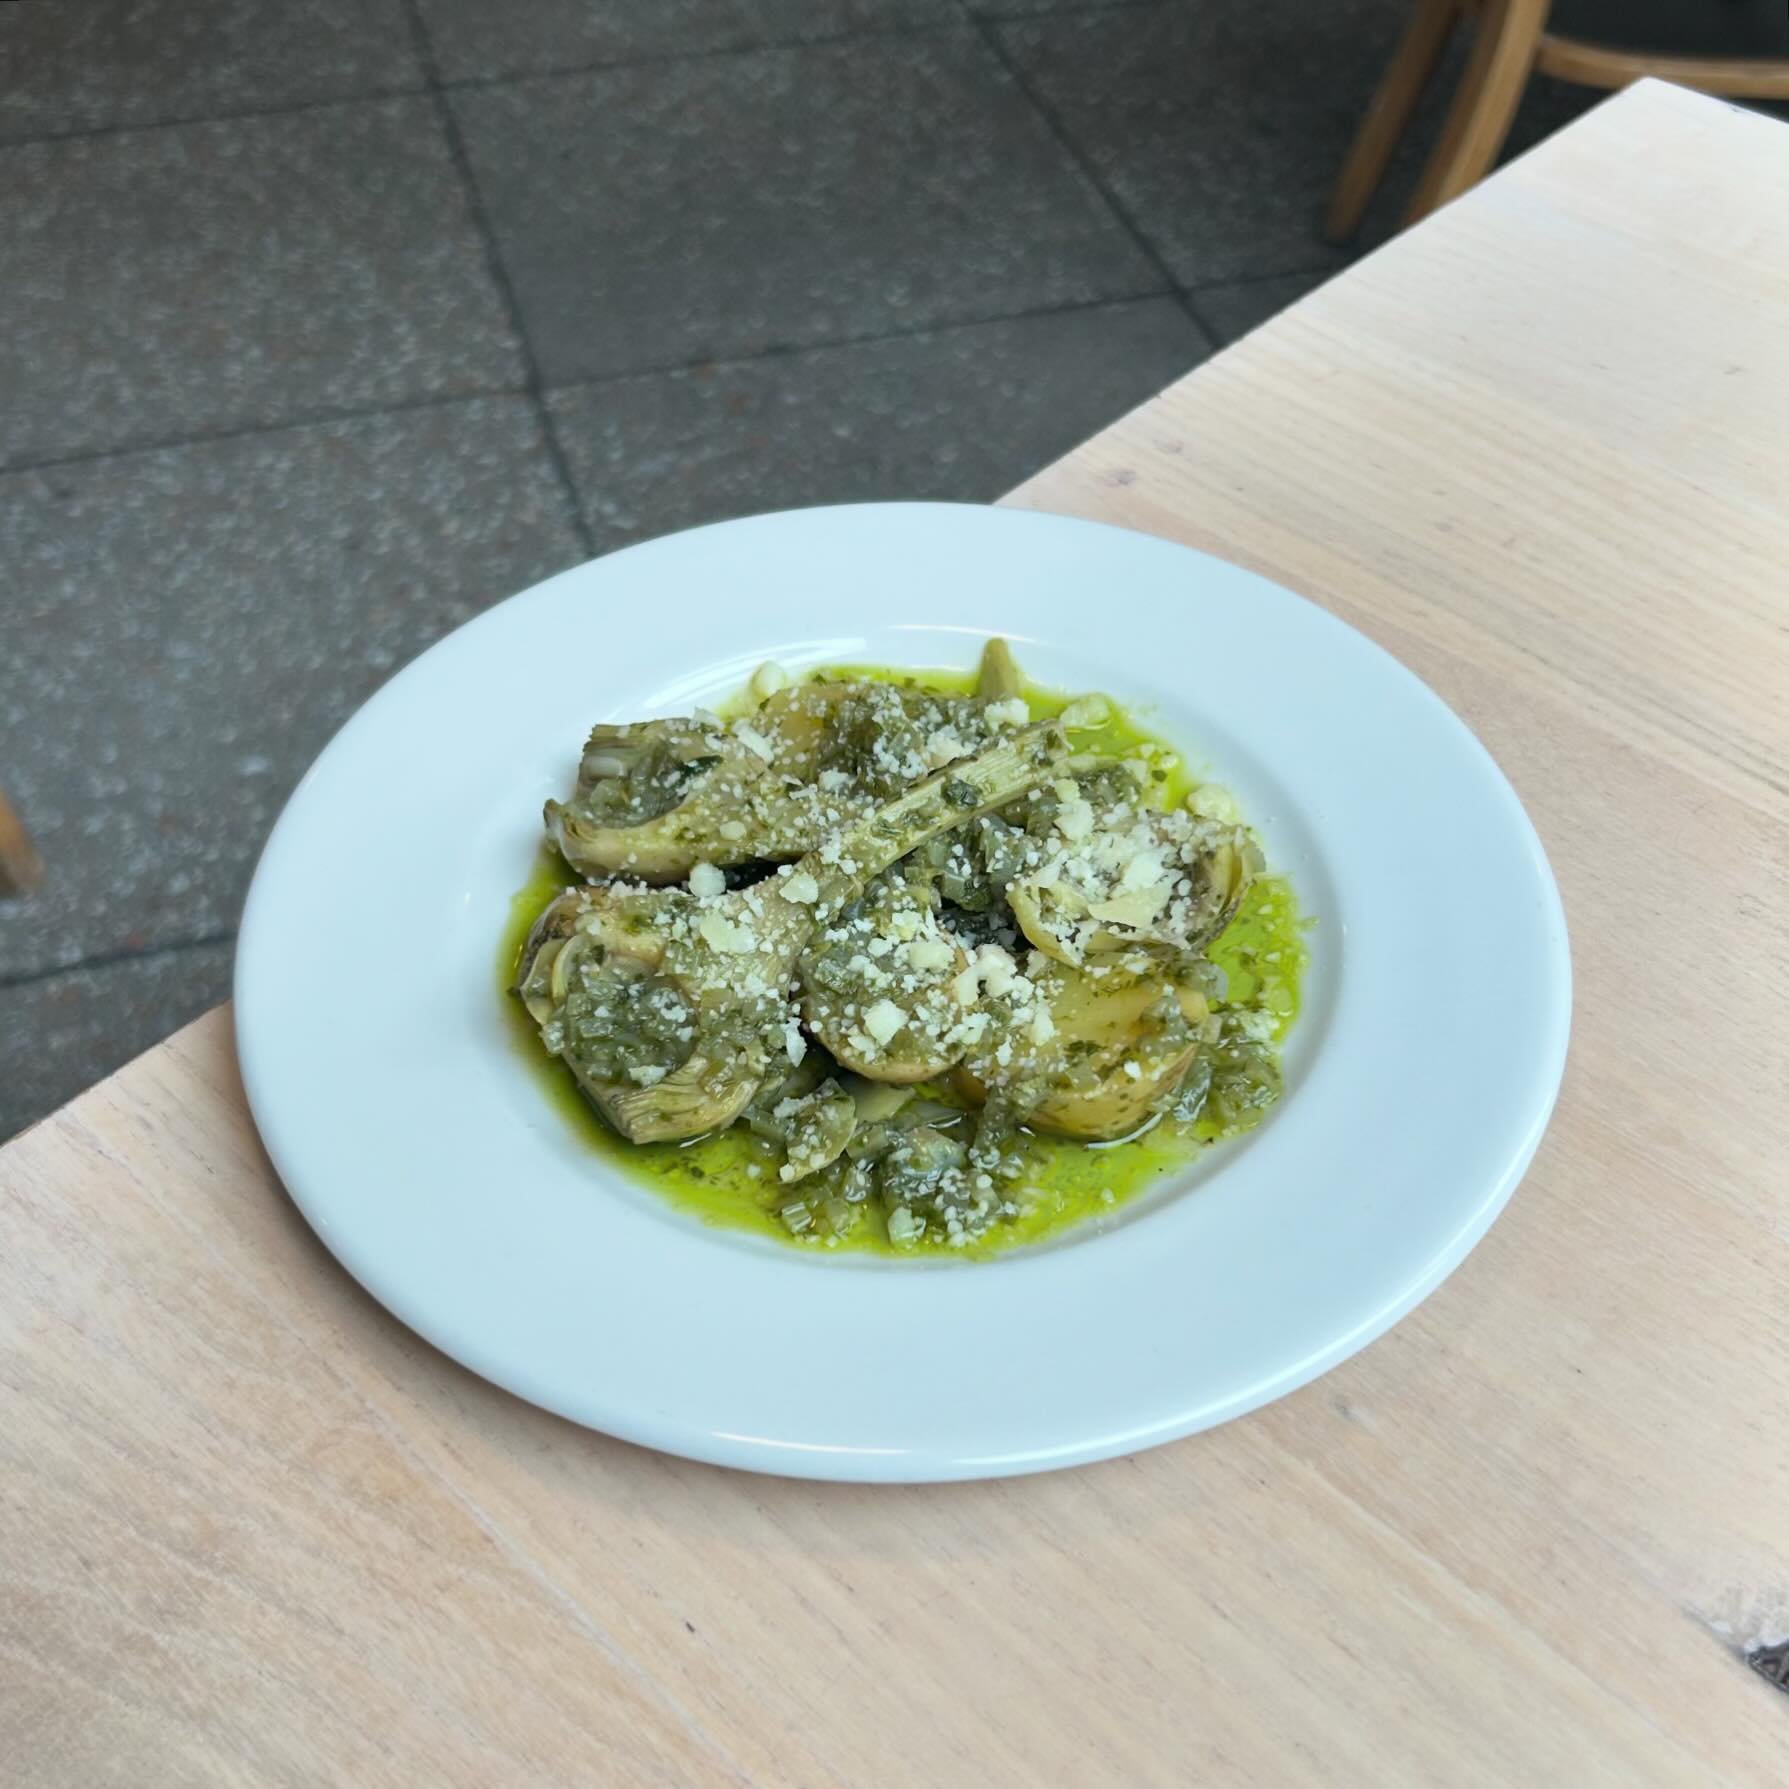 Violet artichokes, tiny dice, potato, lovage and pecorino in the restaurant. And that restaurant is in Glasgow!